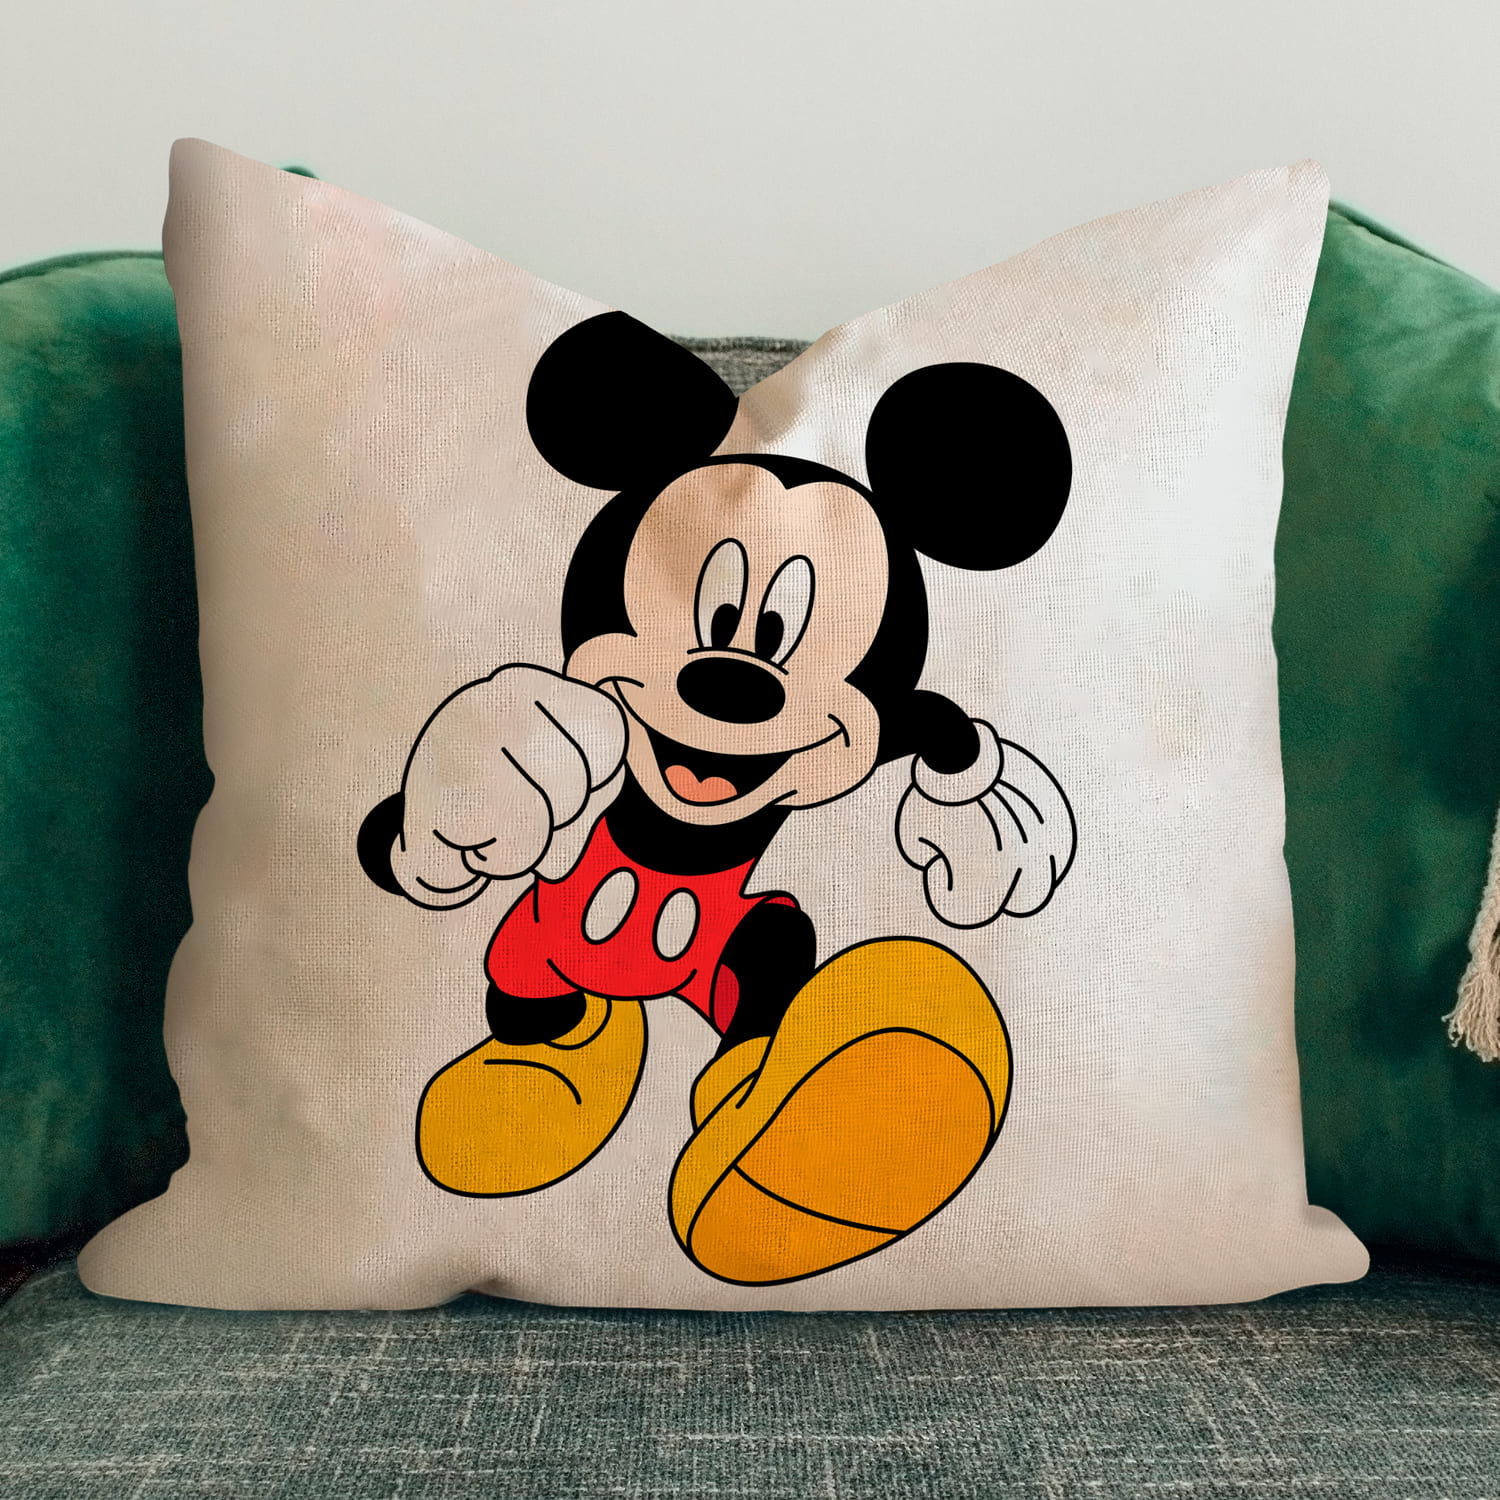 Pillow design with mickey mouse image.